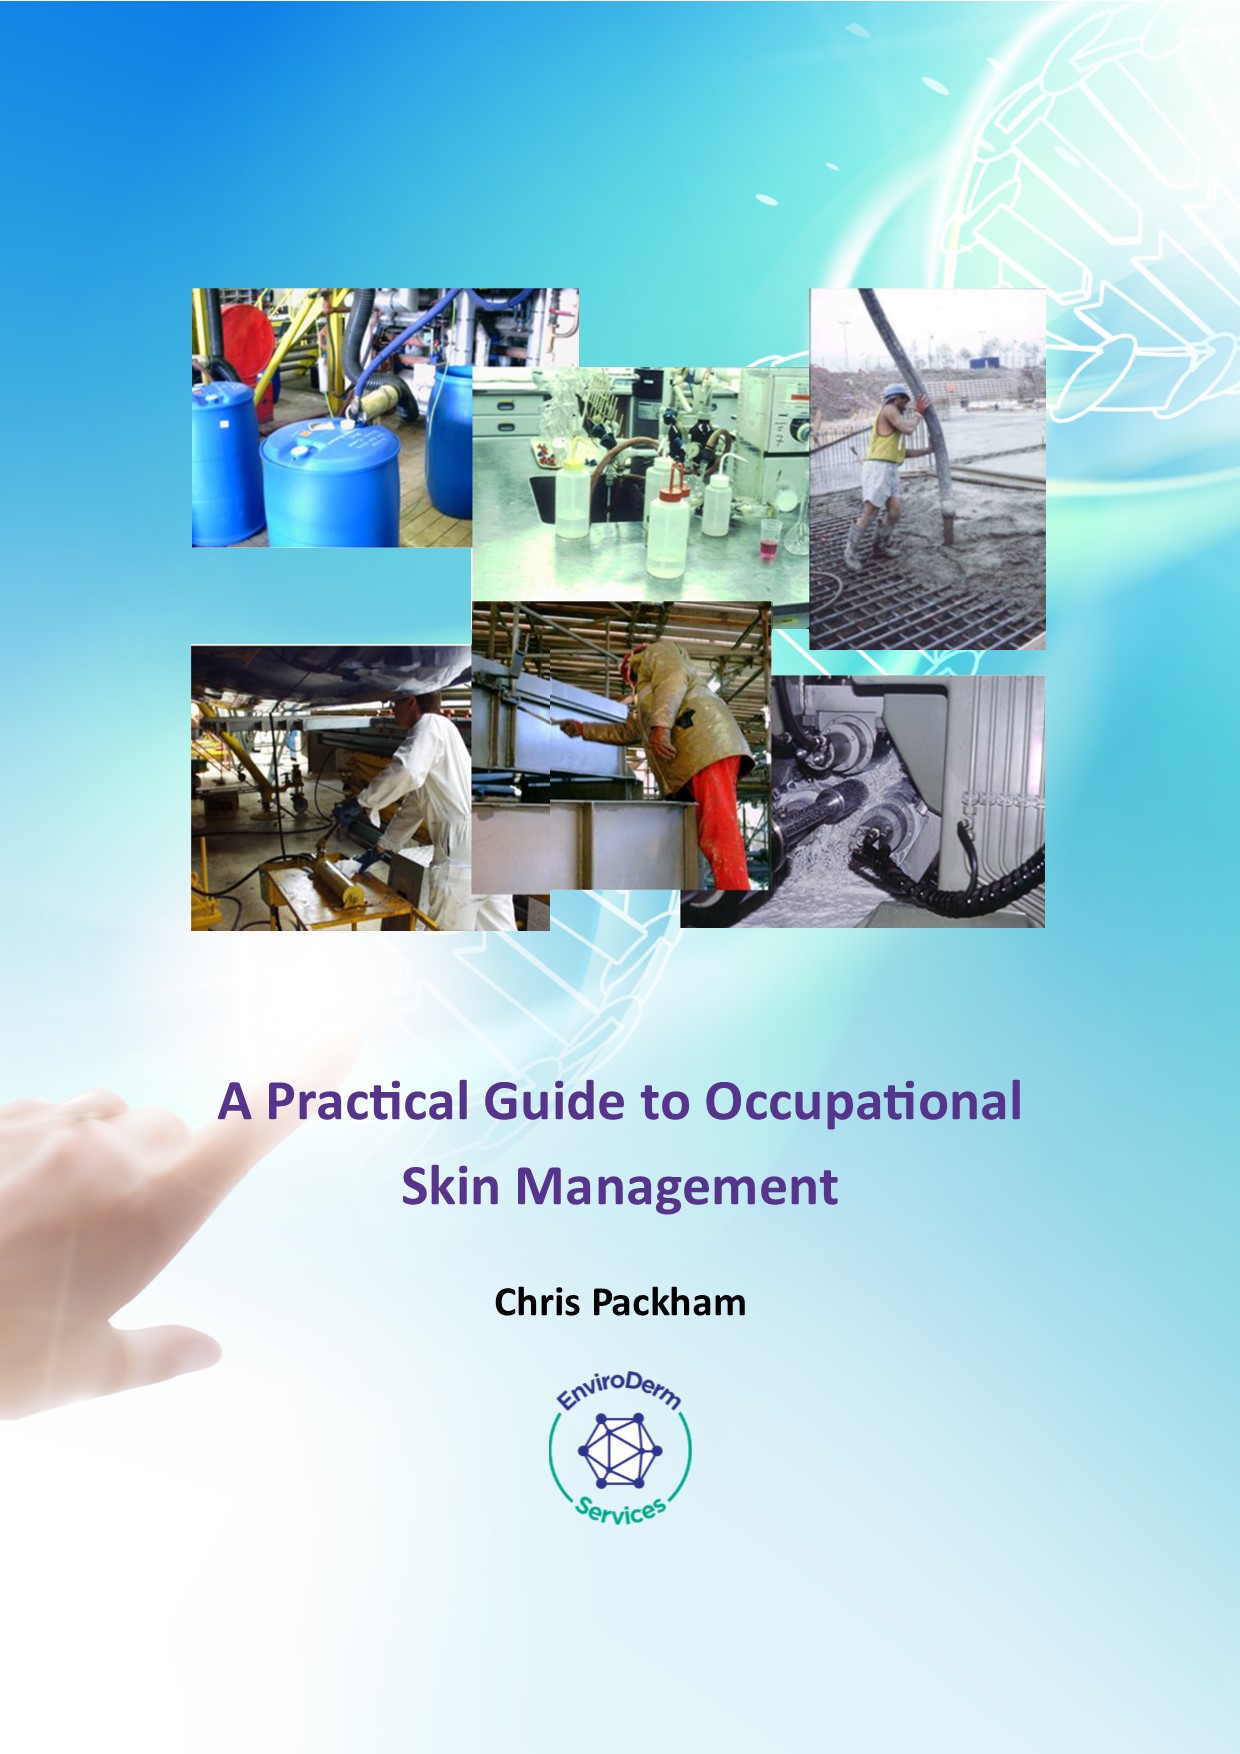 Occupational Skin Management Guide